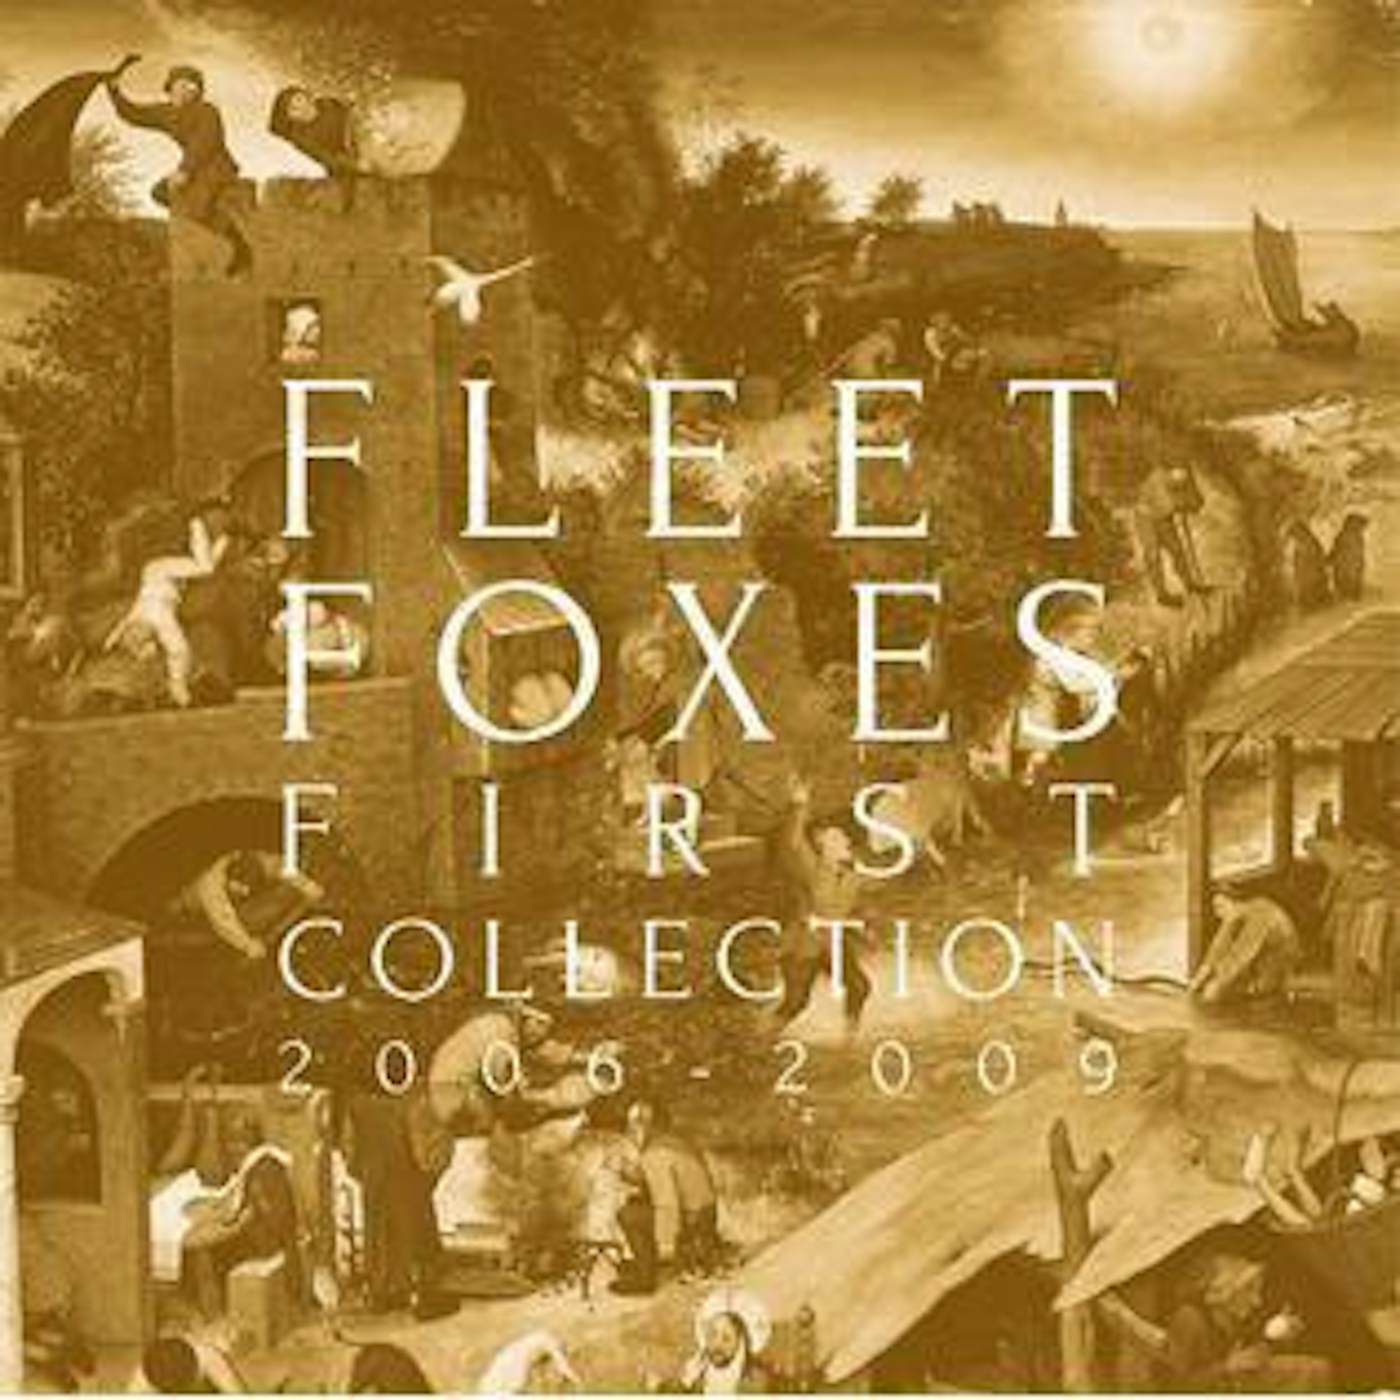 Fleet Foxes First Collection 2006-2009 Vinyl Record